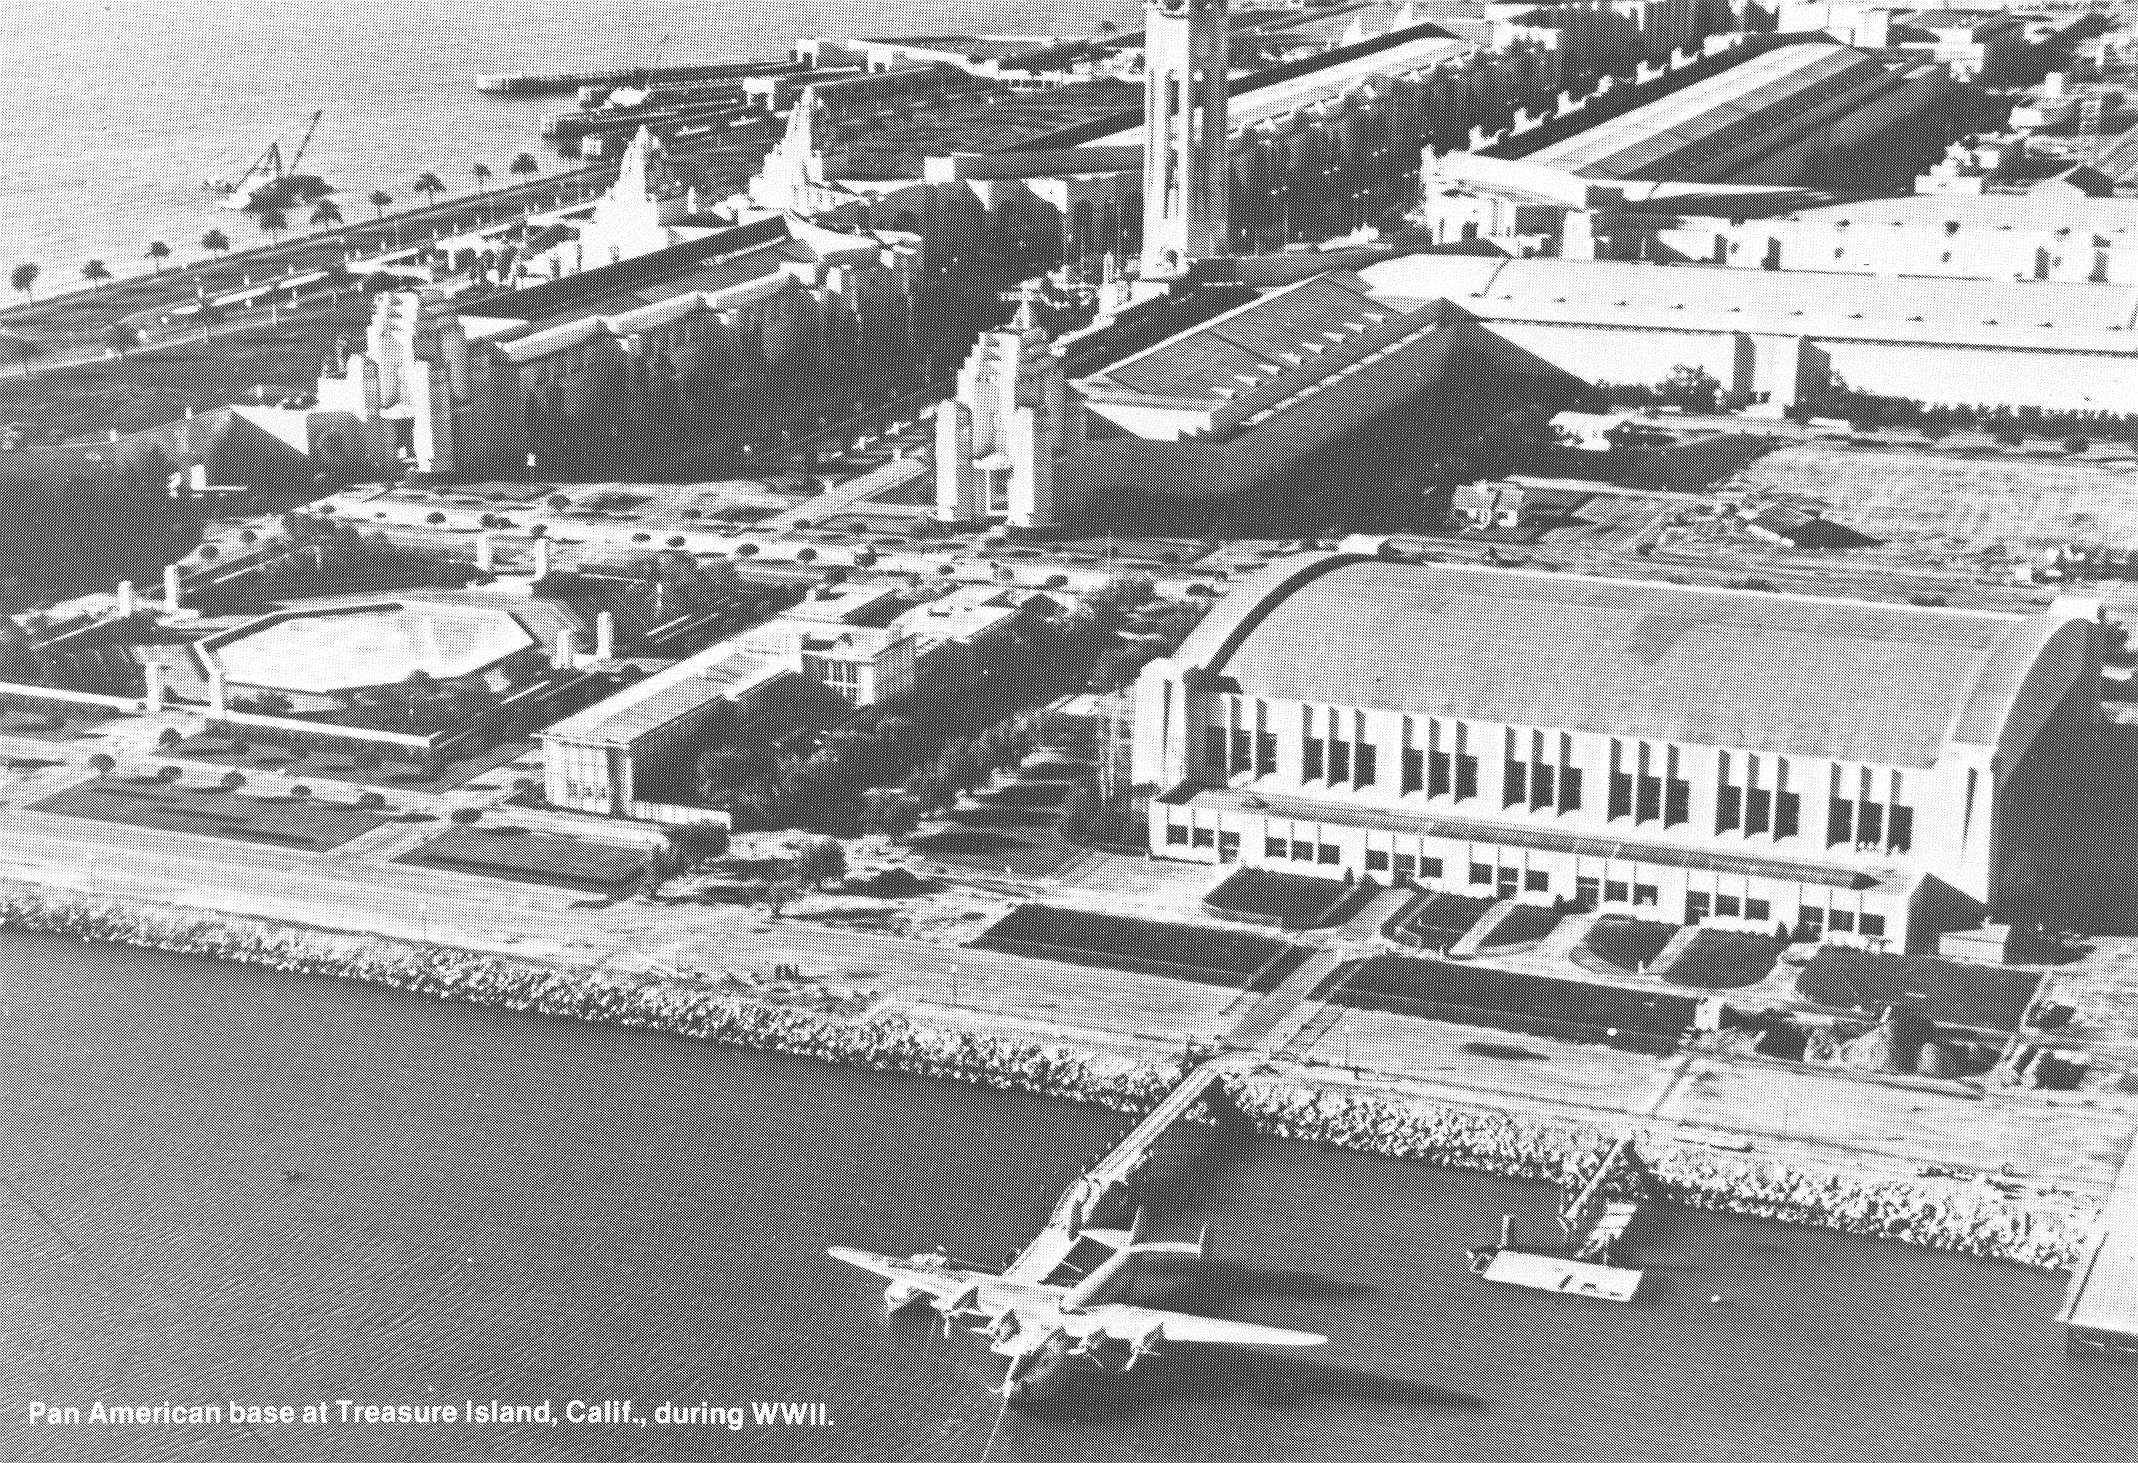 1940s Treasure Island base San Franciswco with Boeing B314 moored.  Treasure Island was one of 3 large flying boat bases along with the Marine Air Terminal in New York and Dinner Key in Miami.